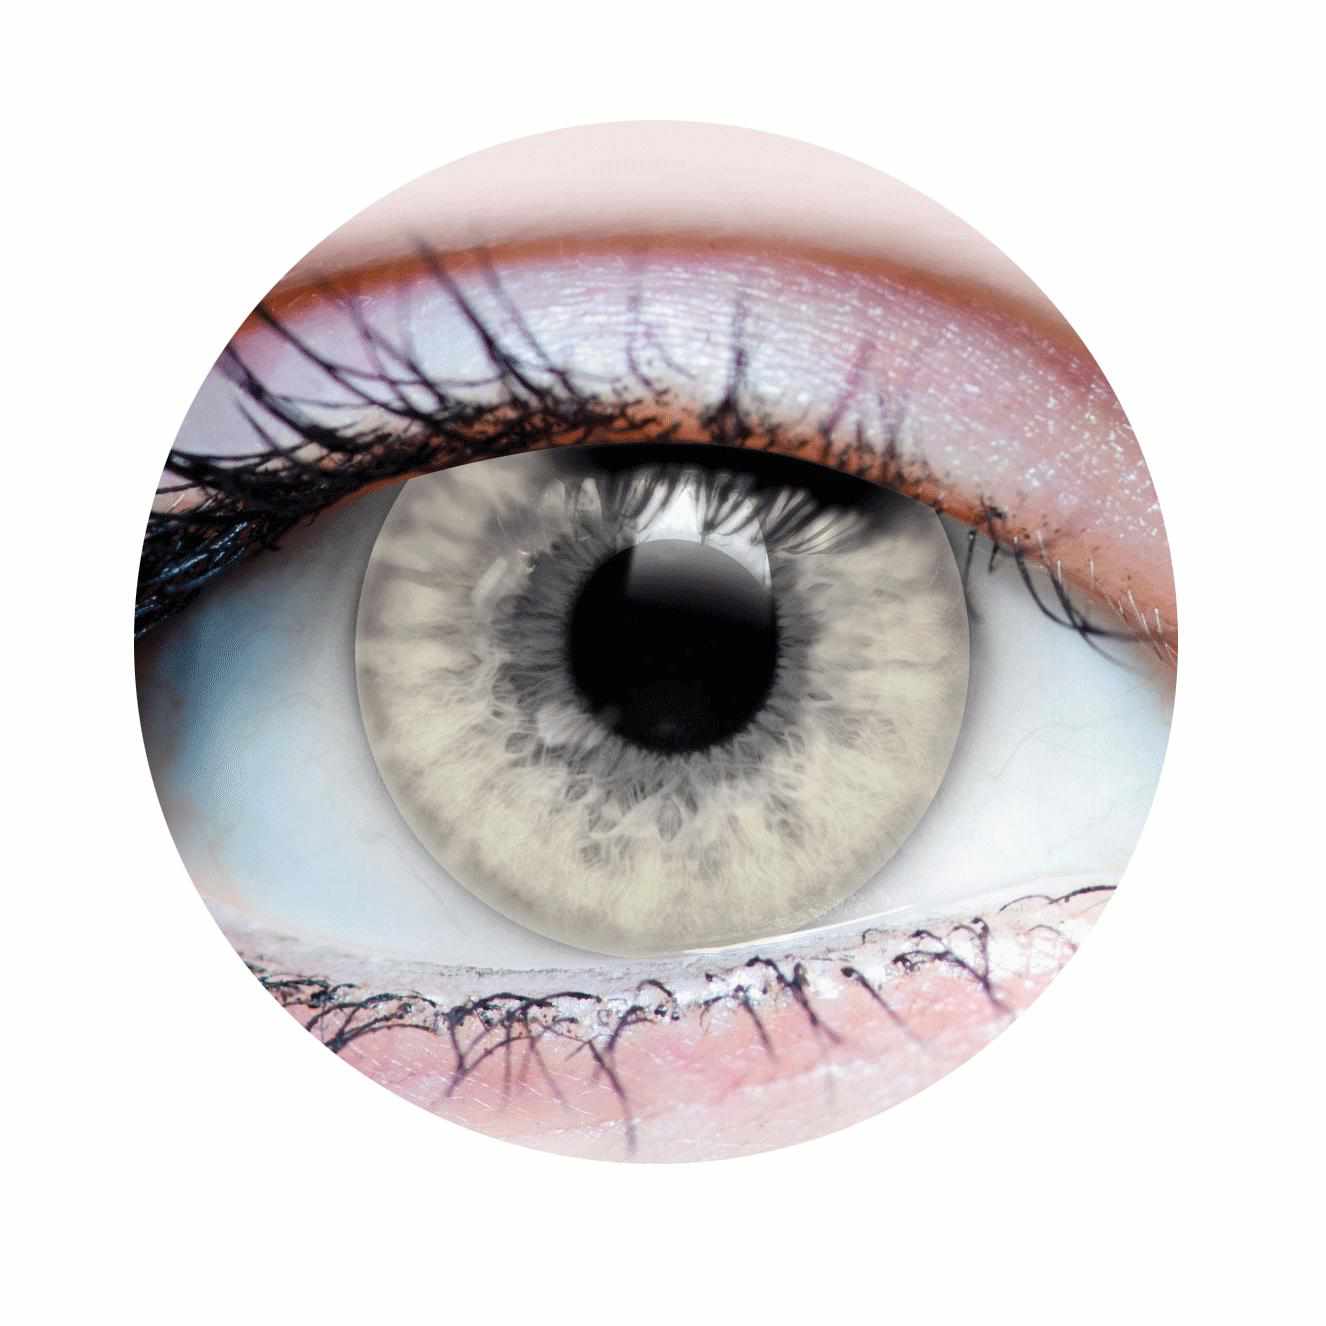 White colored contact lenses, coloured contact lenses, color contacts, circle lens.